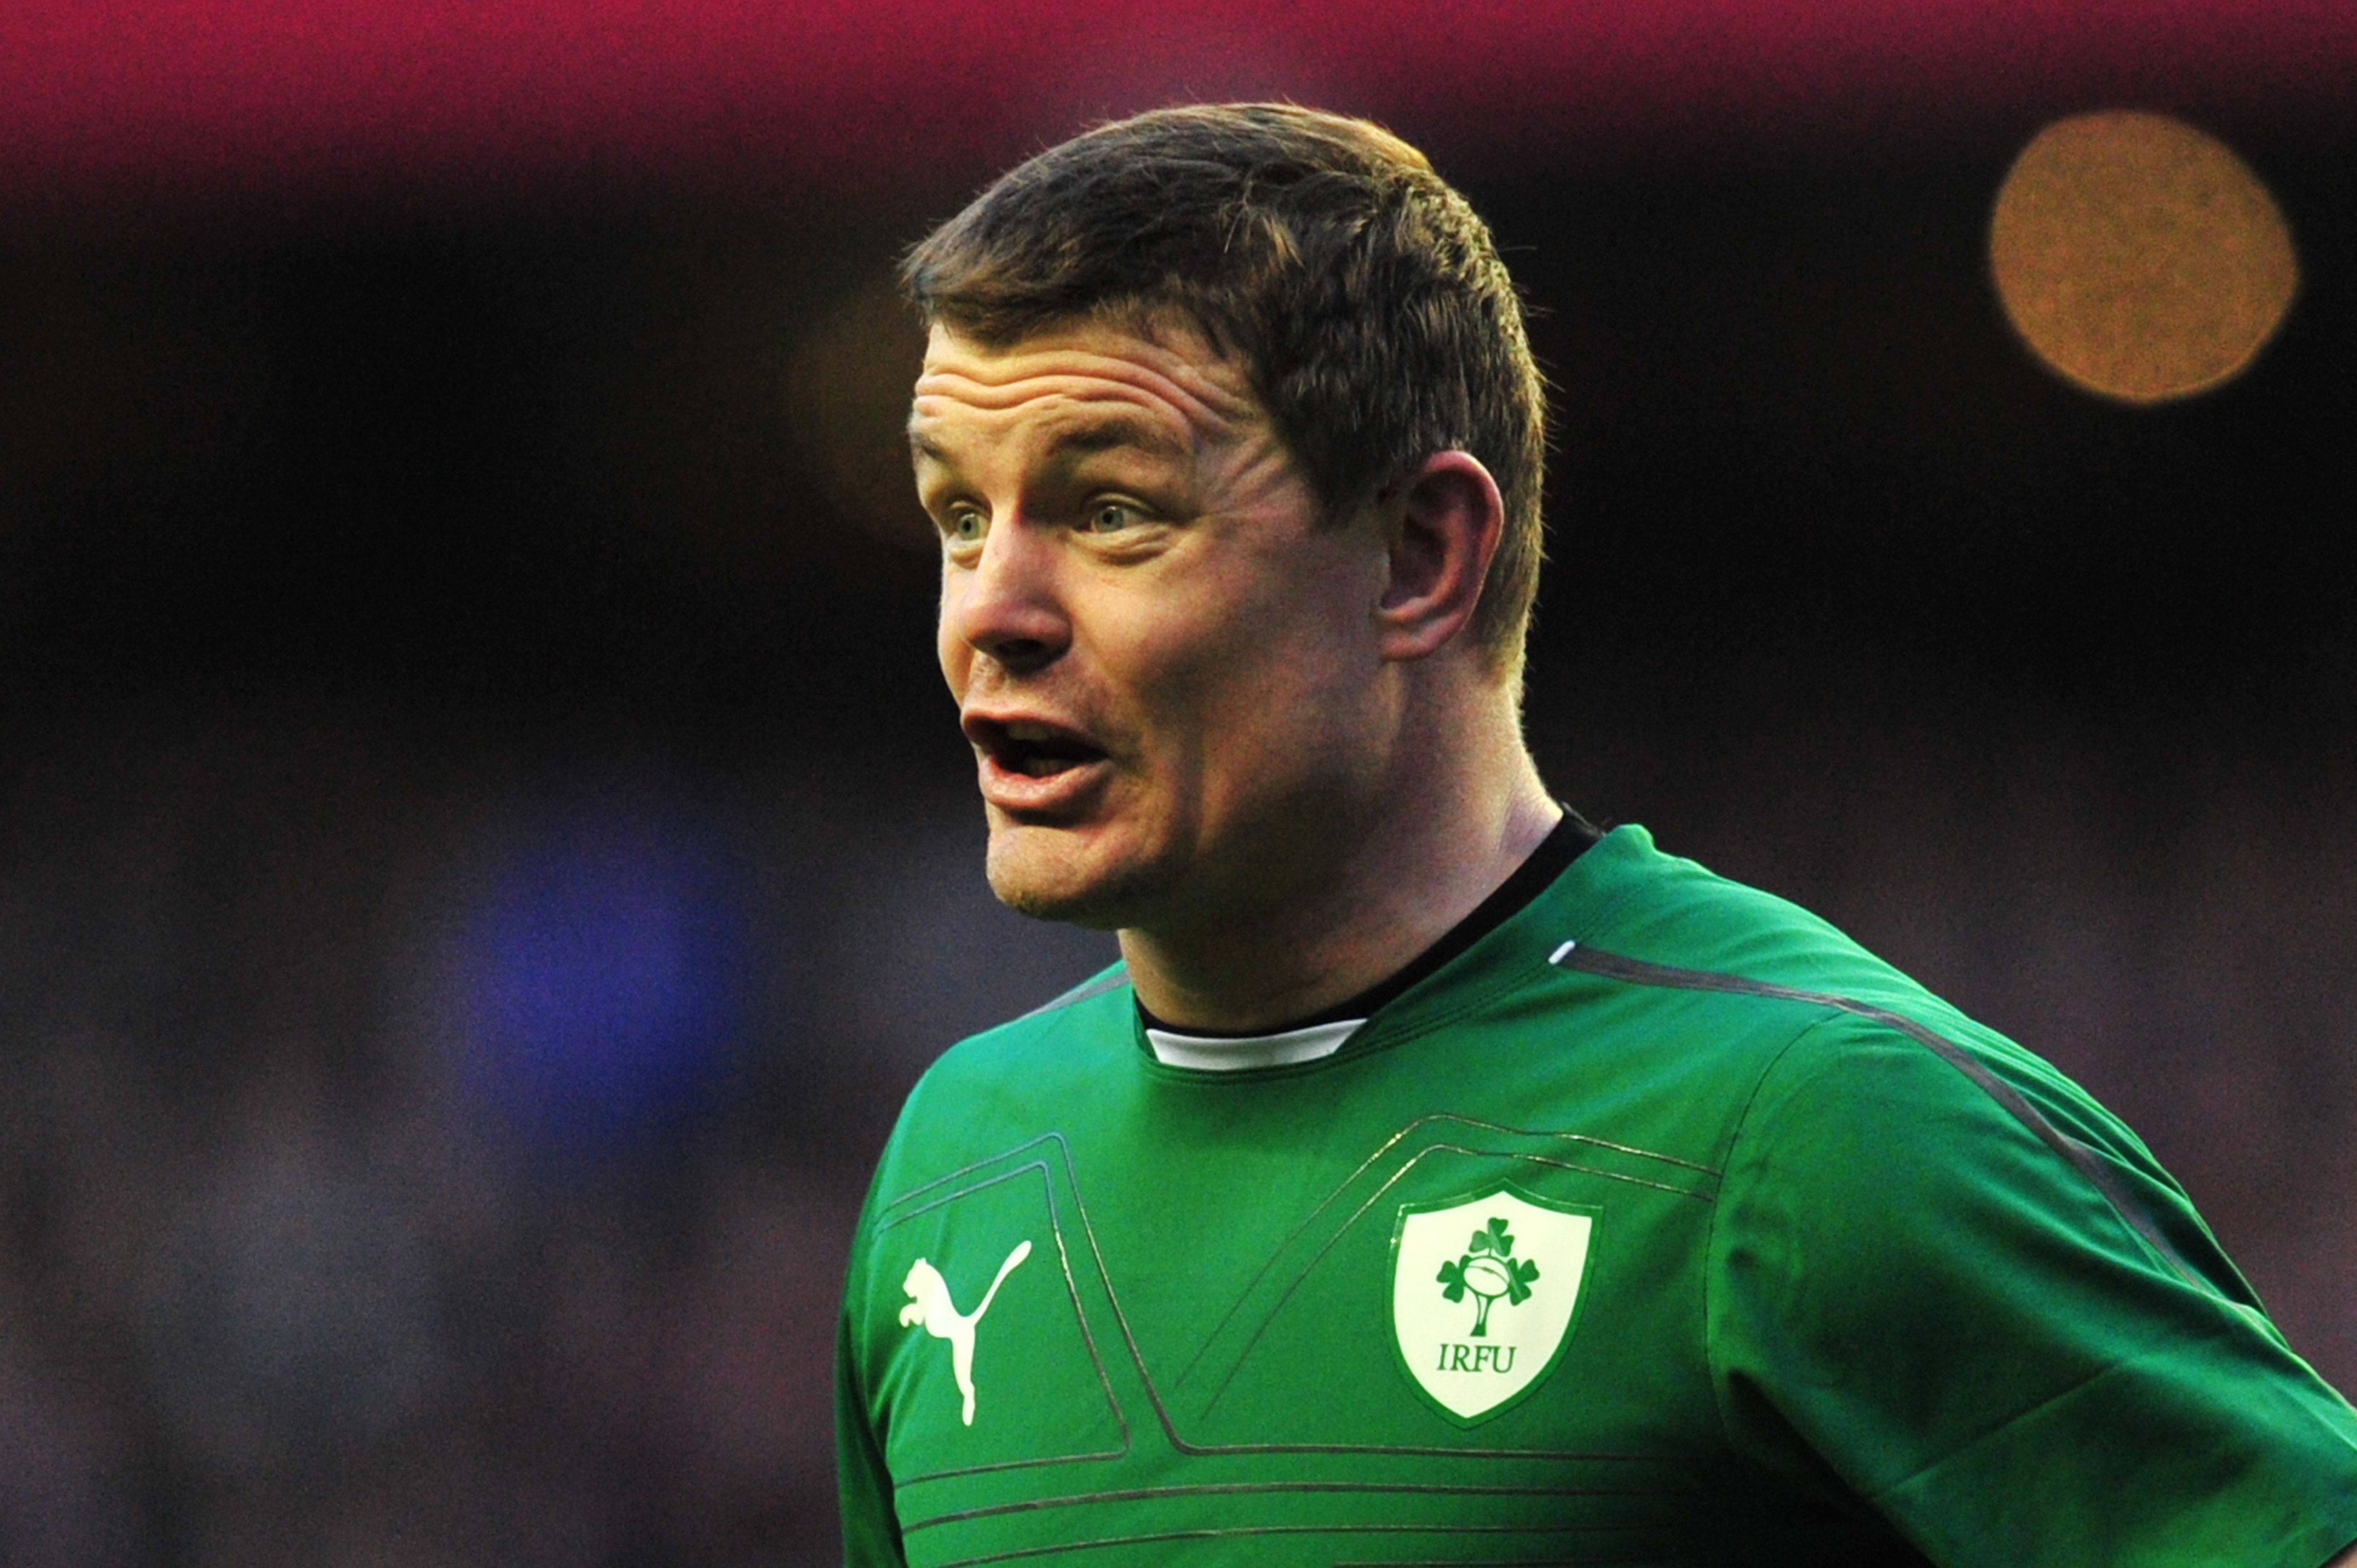 Brian O’Driscoll will make his farewells to the home crowd. Photo: AFP